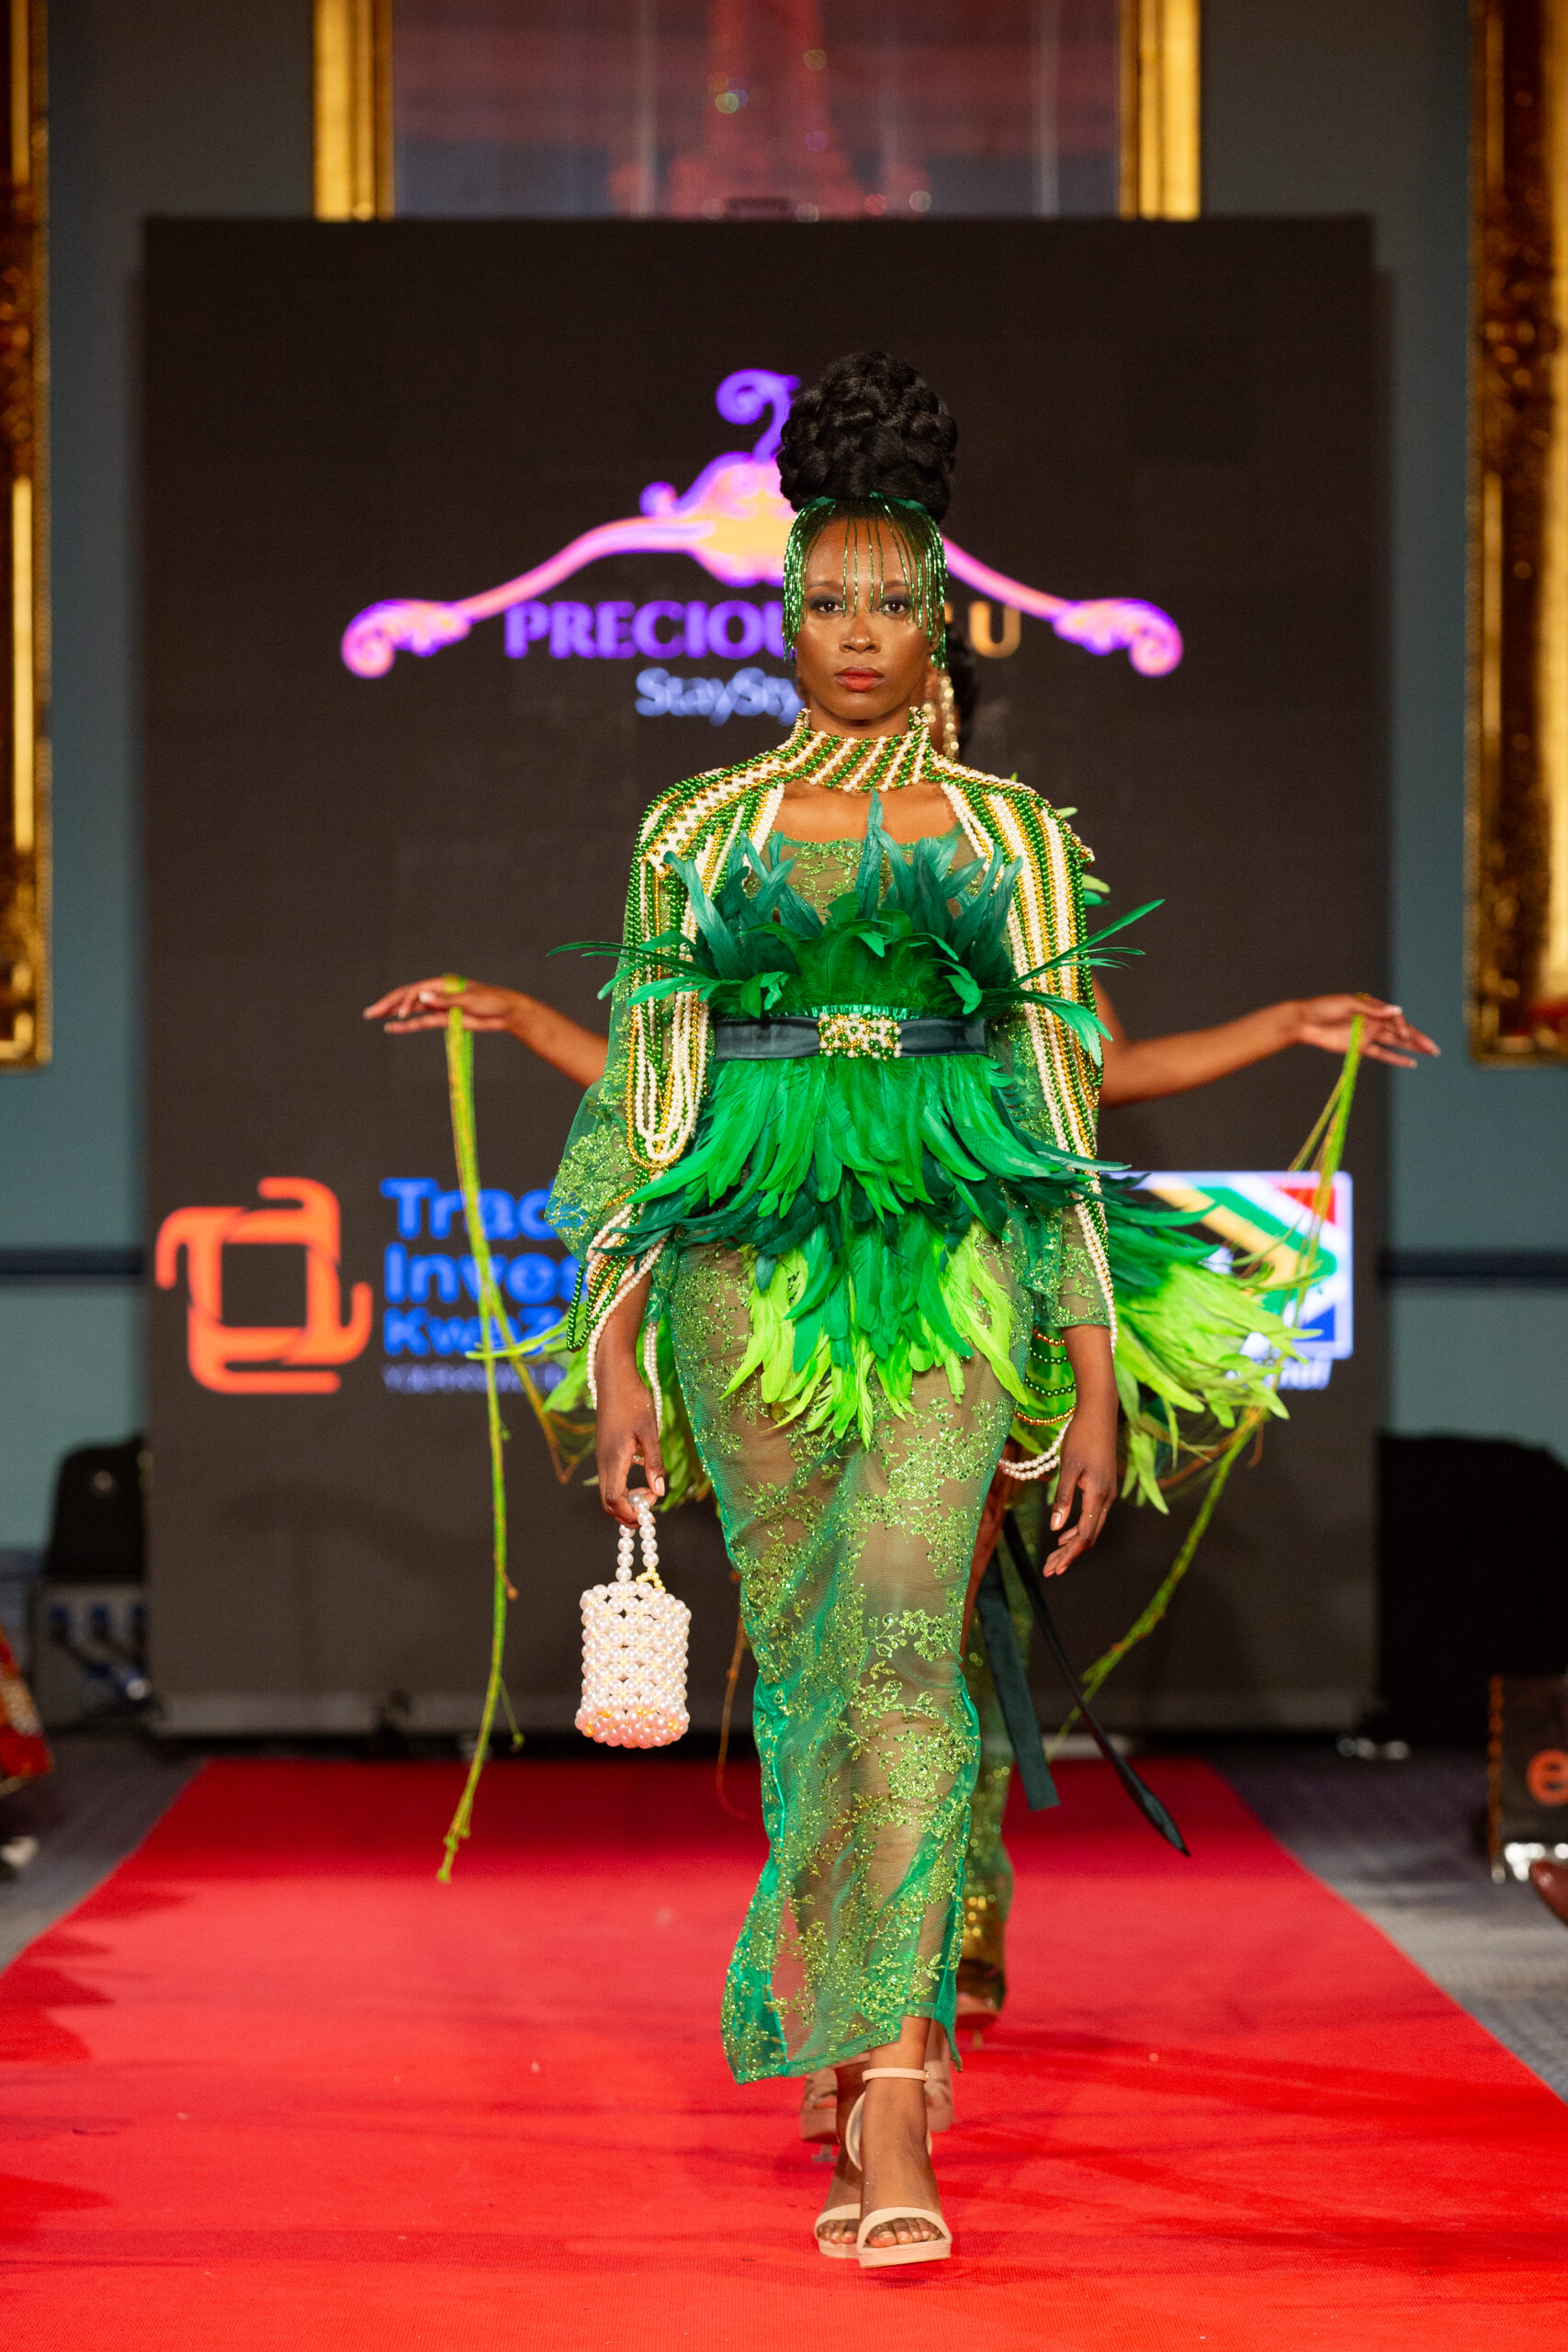 Precious Lulu Couture at Africa Fashion Week London